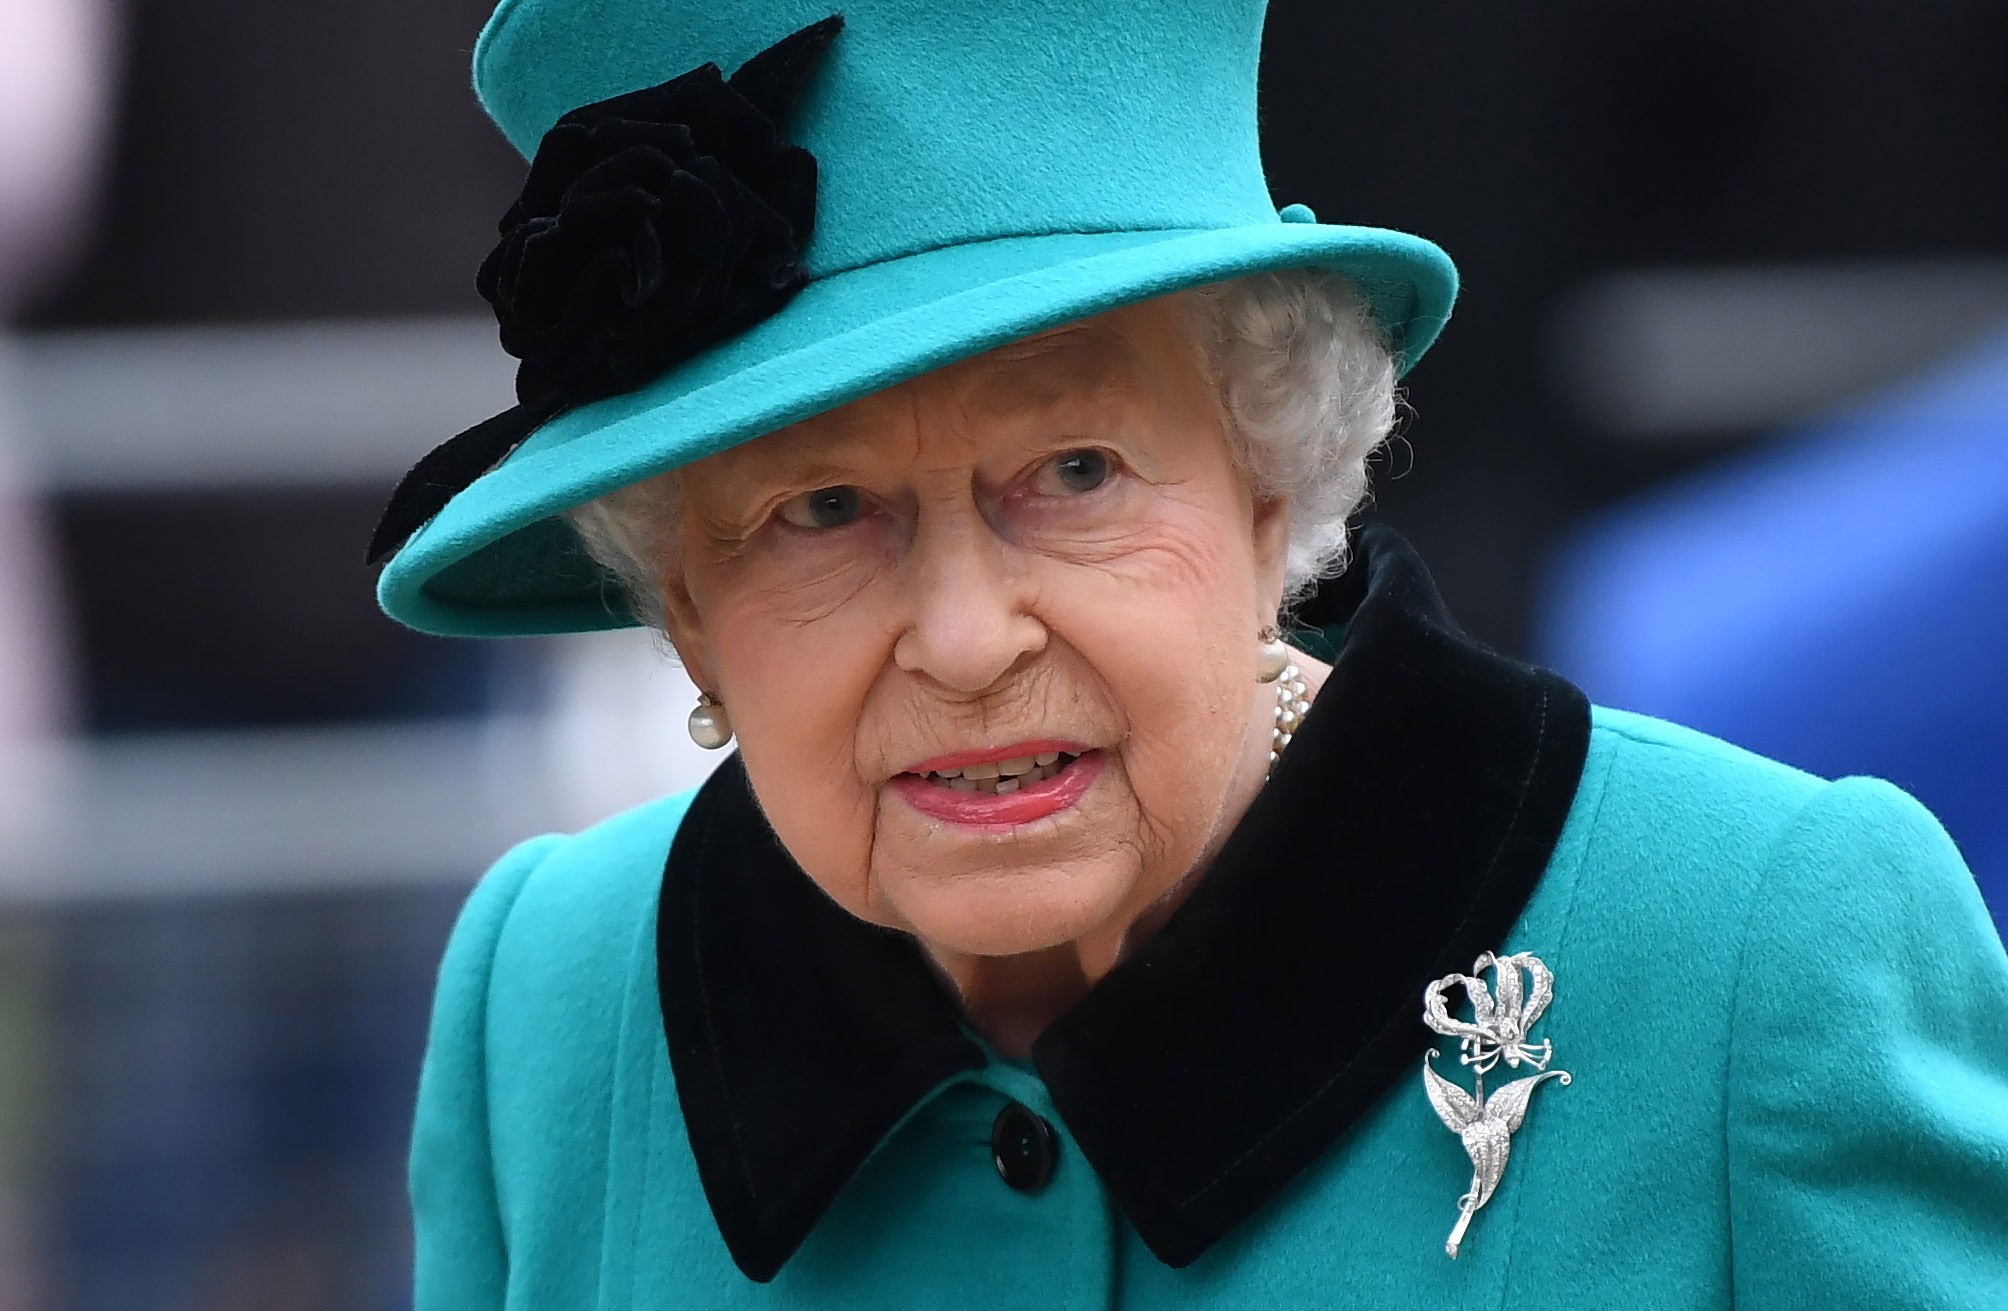 The queen and Prince Charles, her eldest son, effectively control most of the royal family’s fortune and dispense payments to support other family members, according to The Wall Street Journal. Royals who work for the Crown full time aren’t allowed to earn any money from outside sources. Photo: EPA-EFE